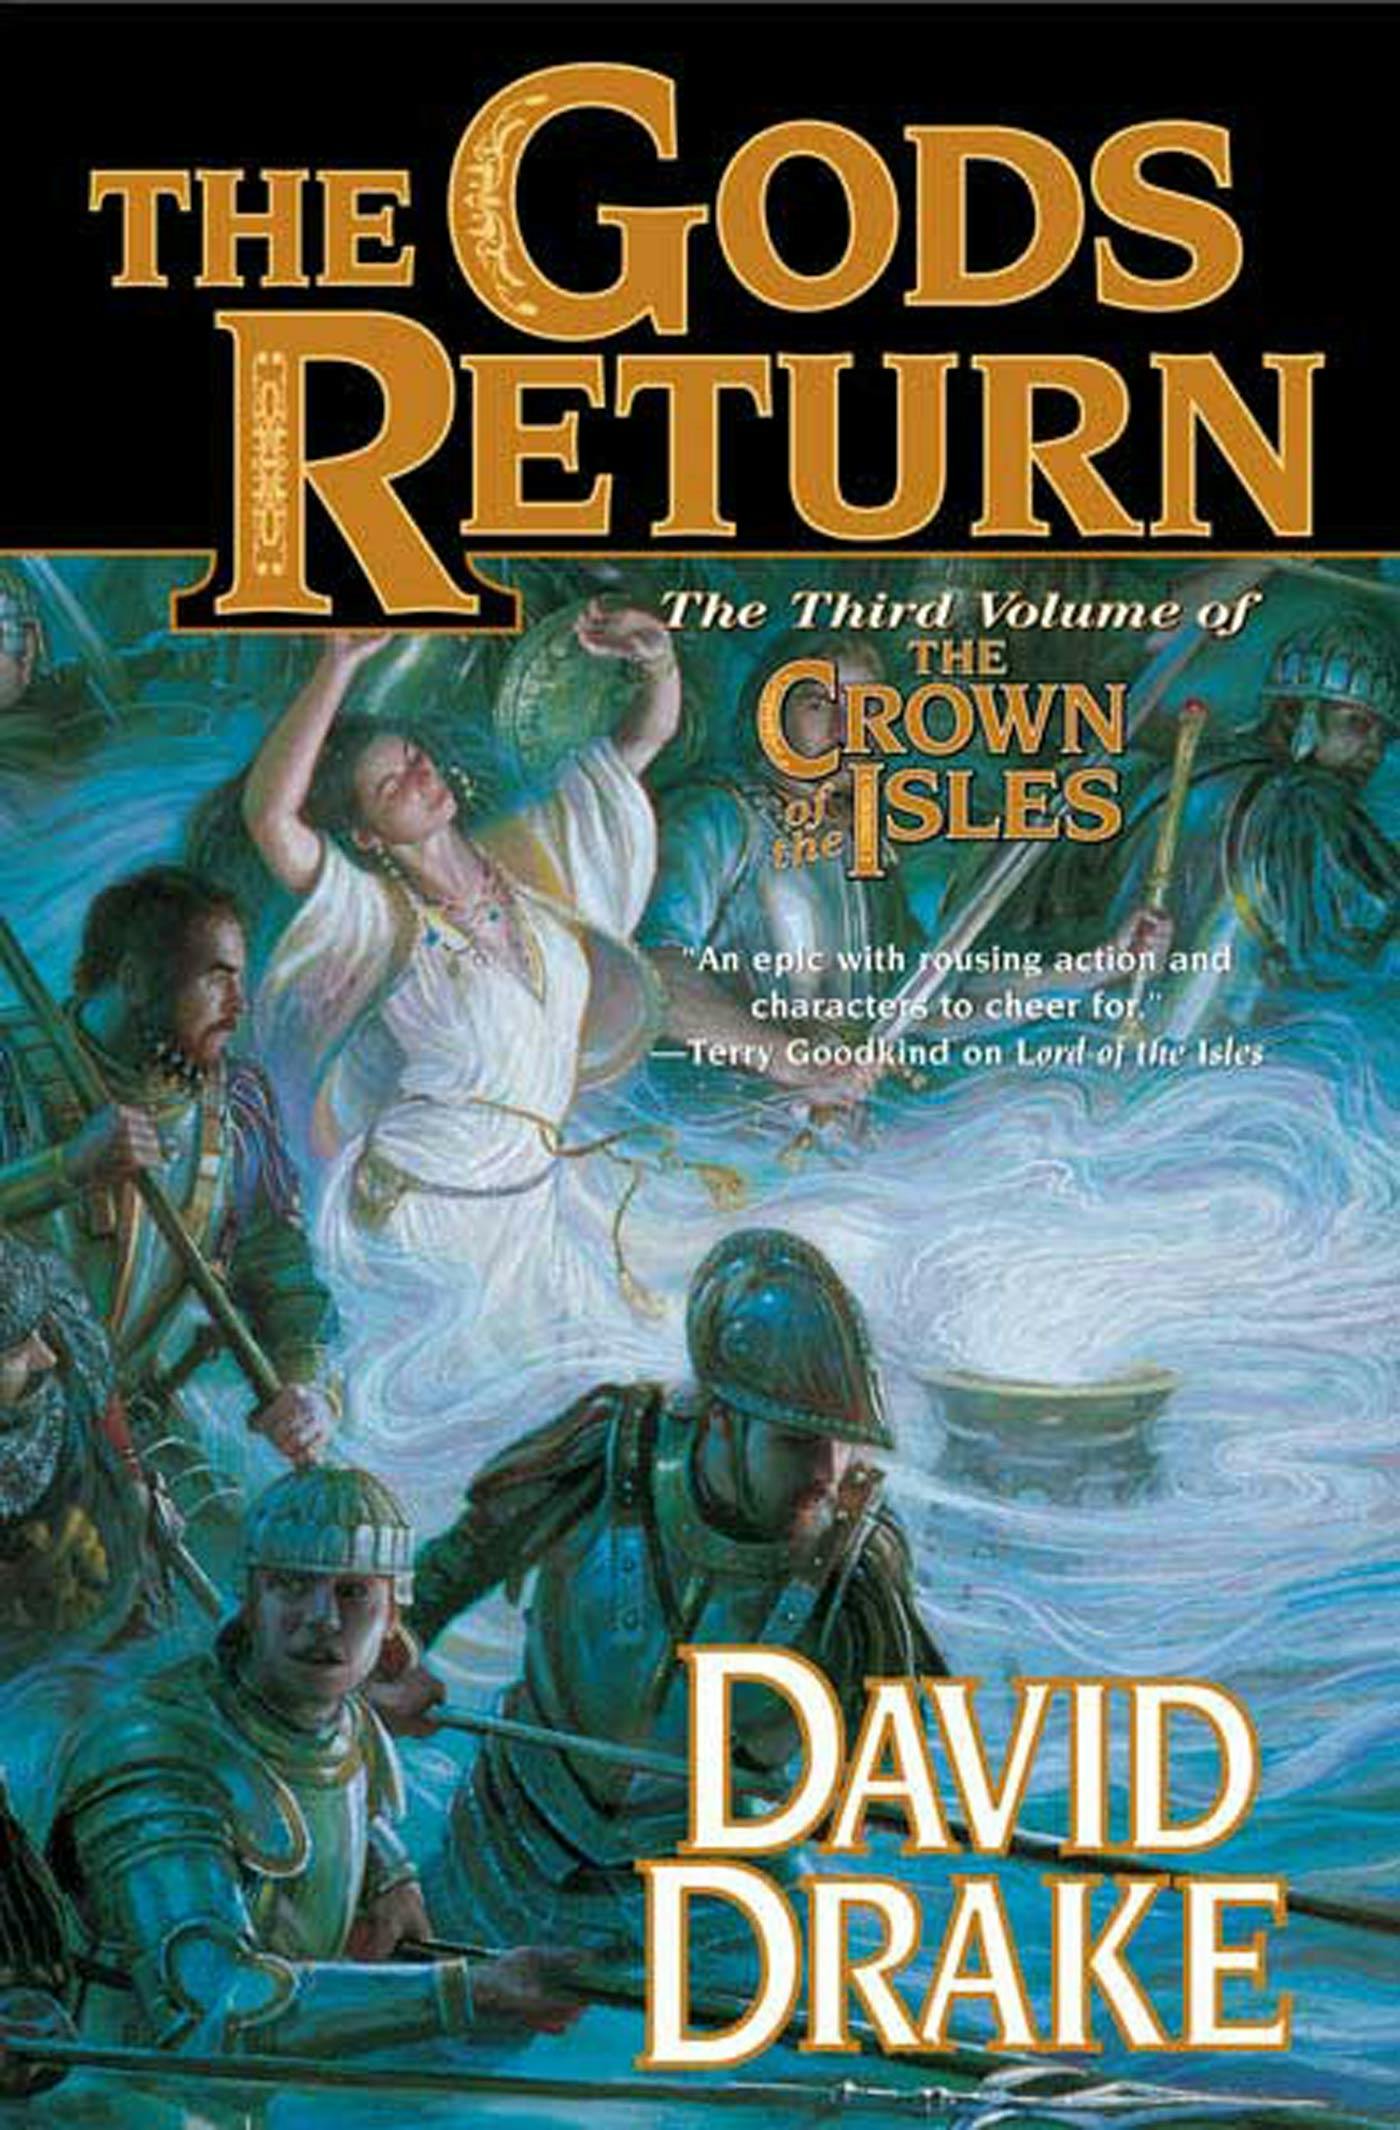 Cover for the book titled as: The Gods Return